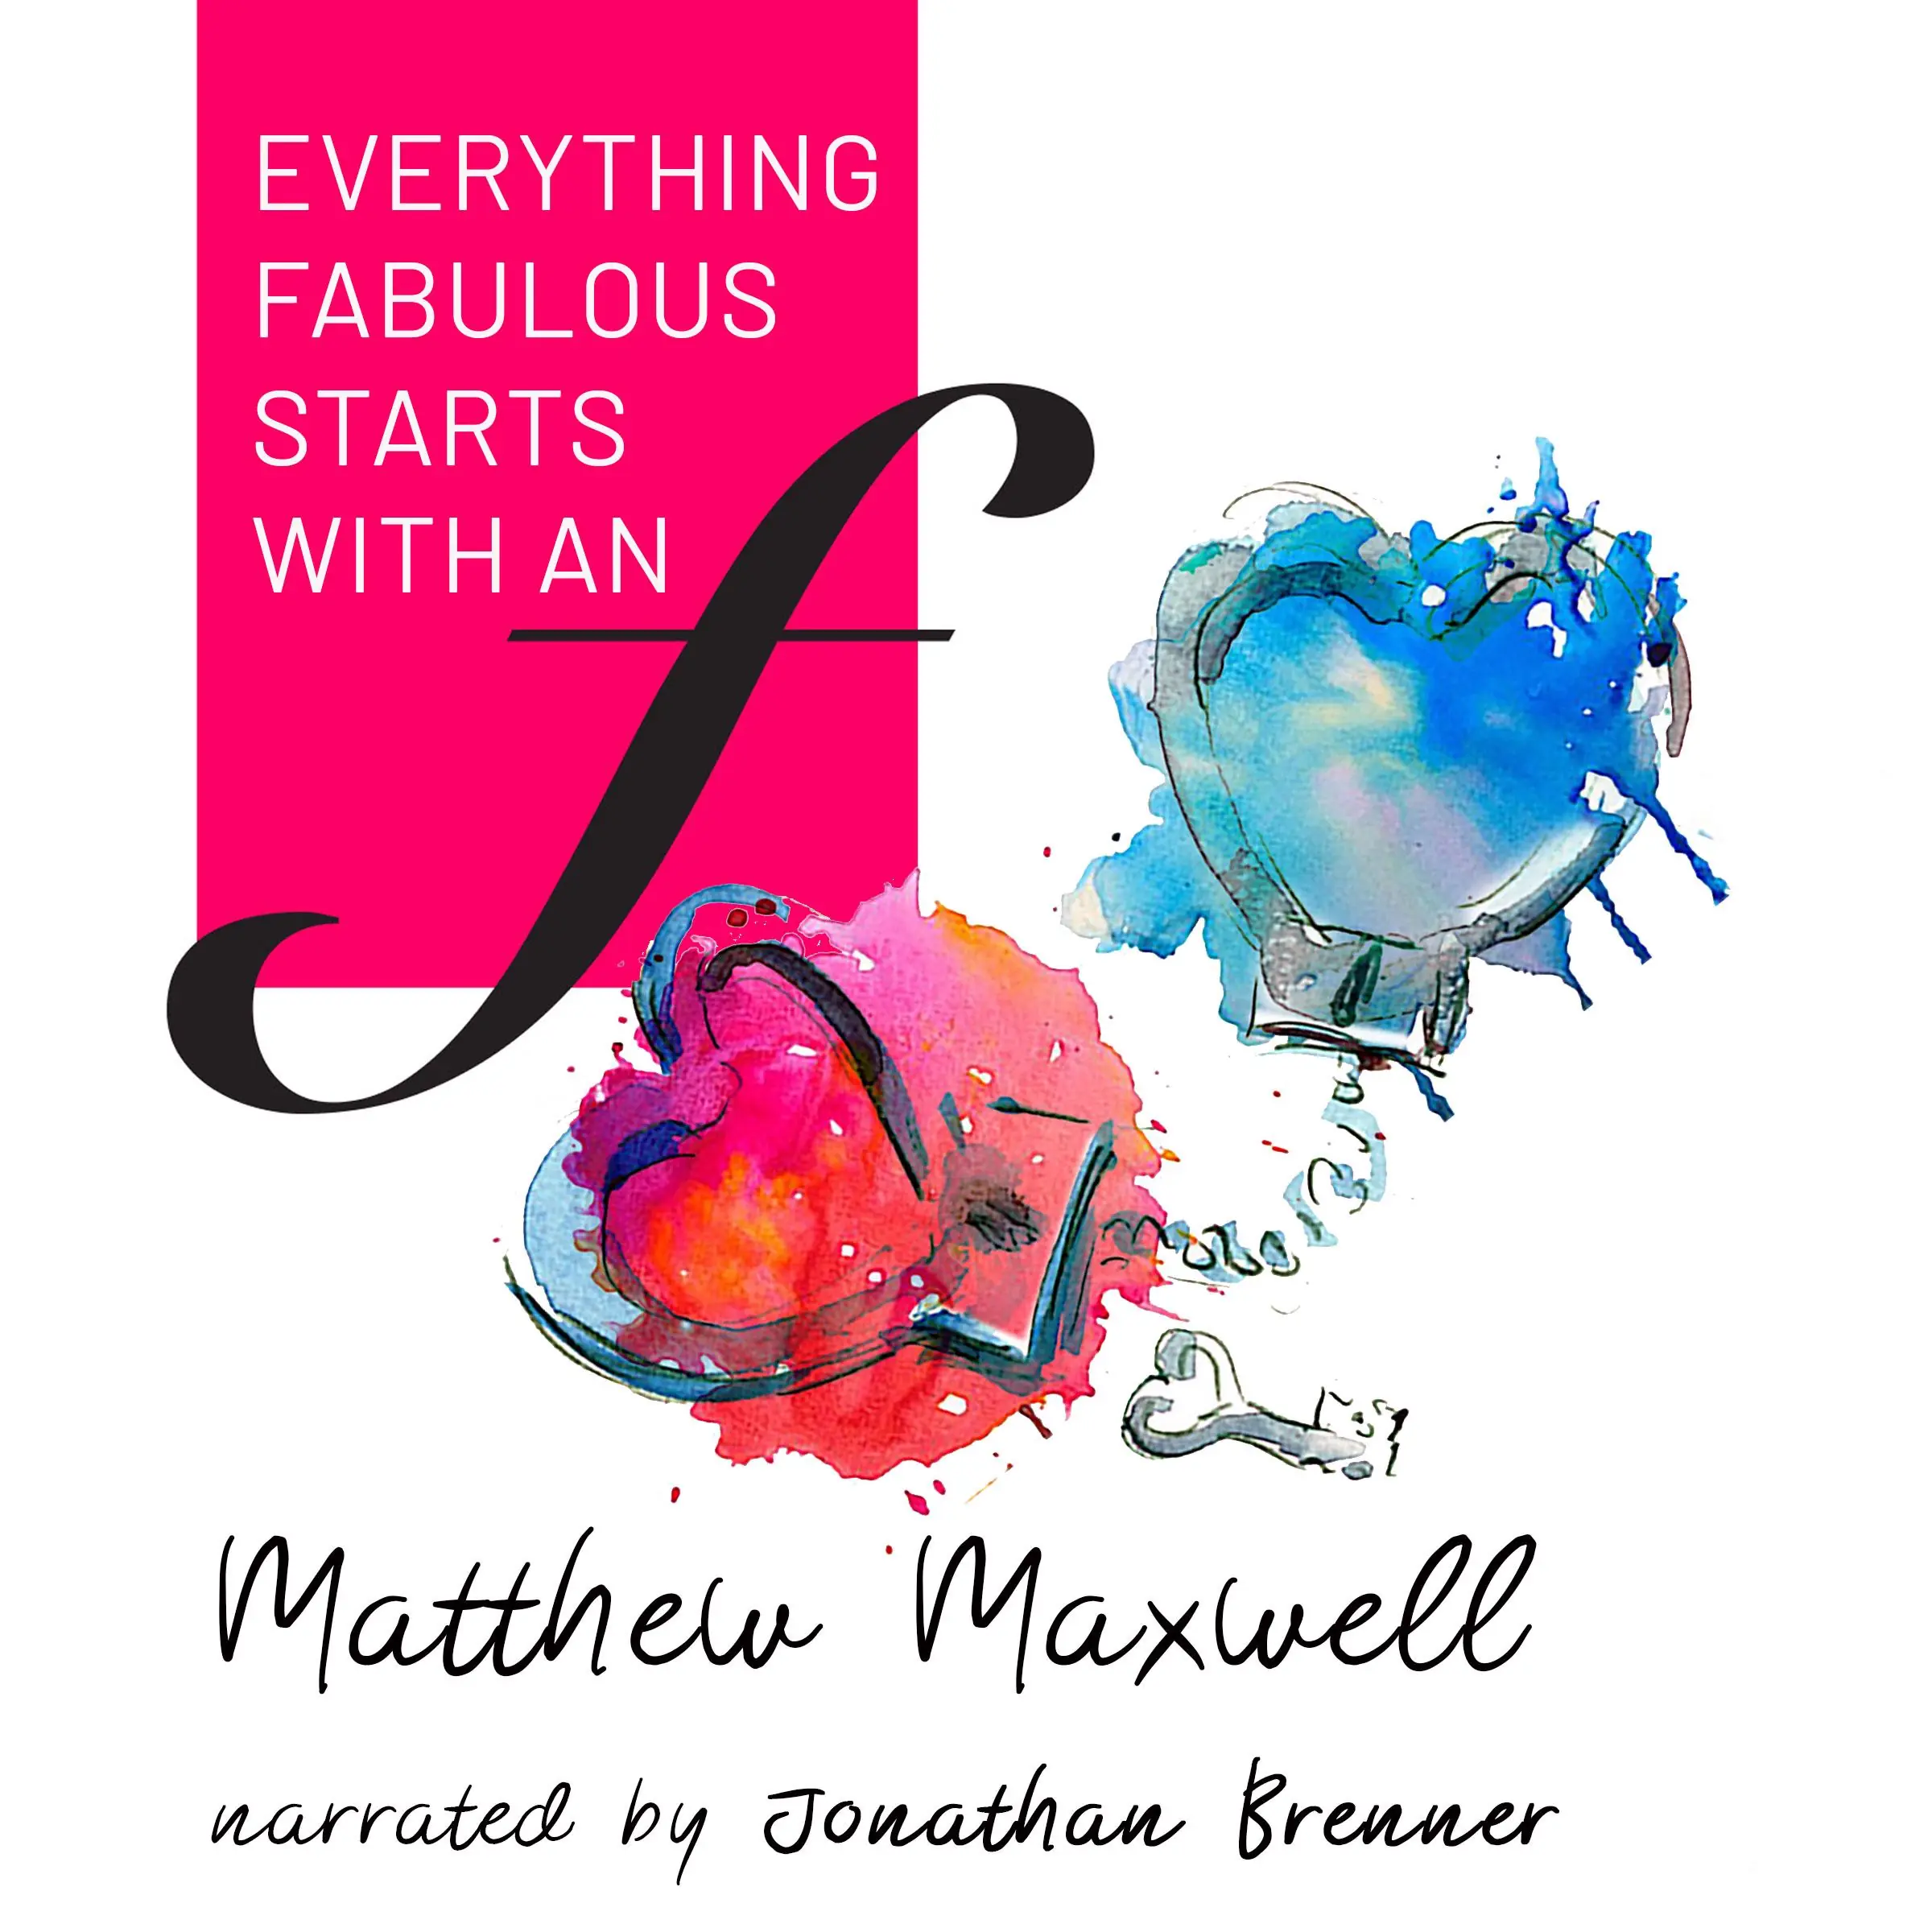 Everything Fabulous starts with an F by Matthew Maxwell Audiobook